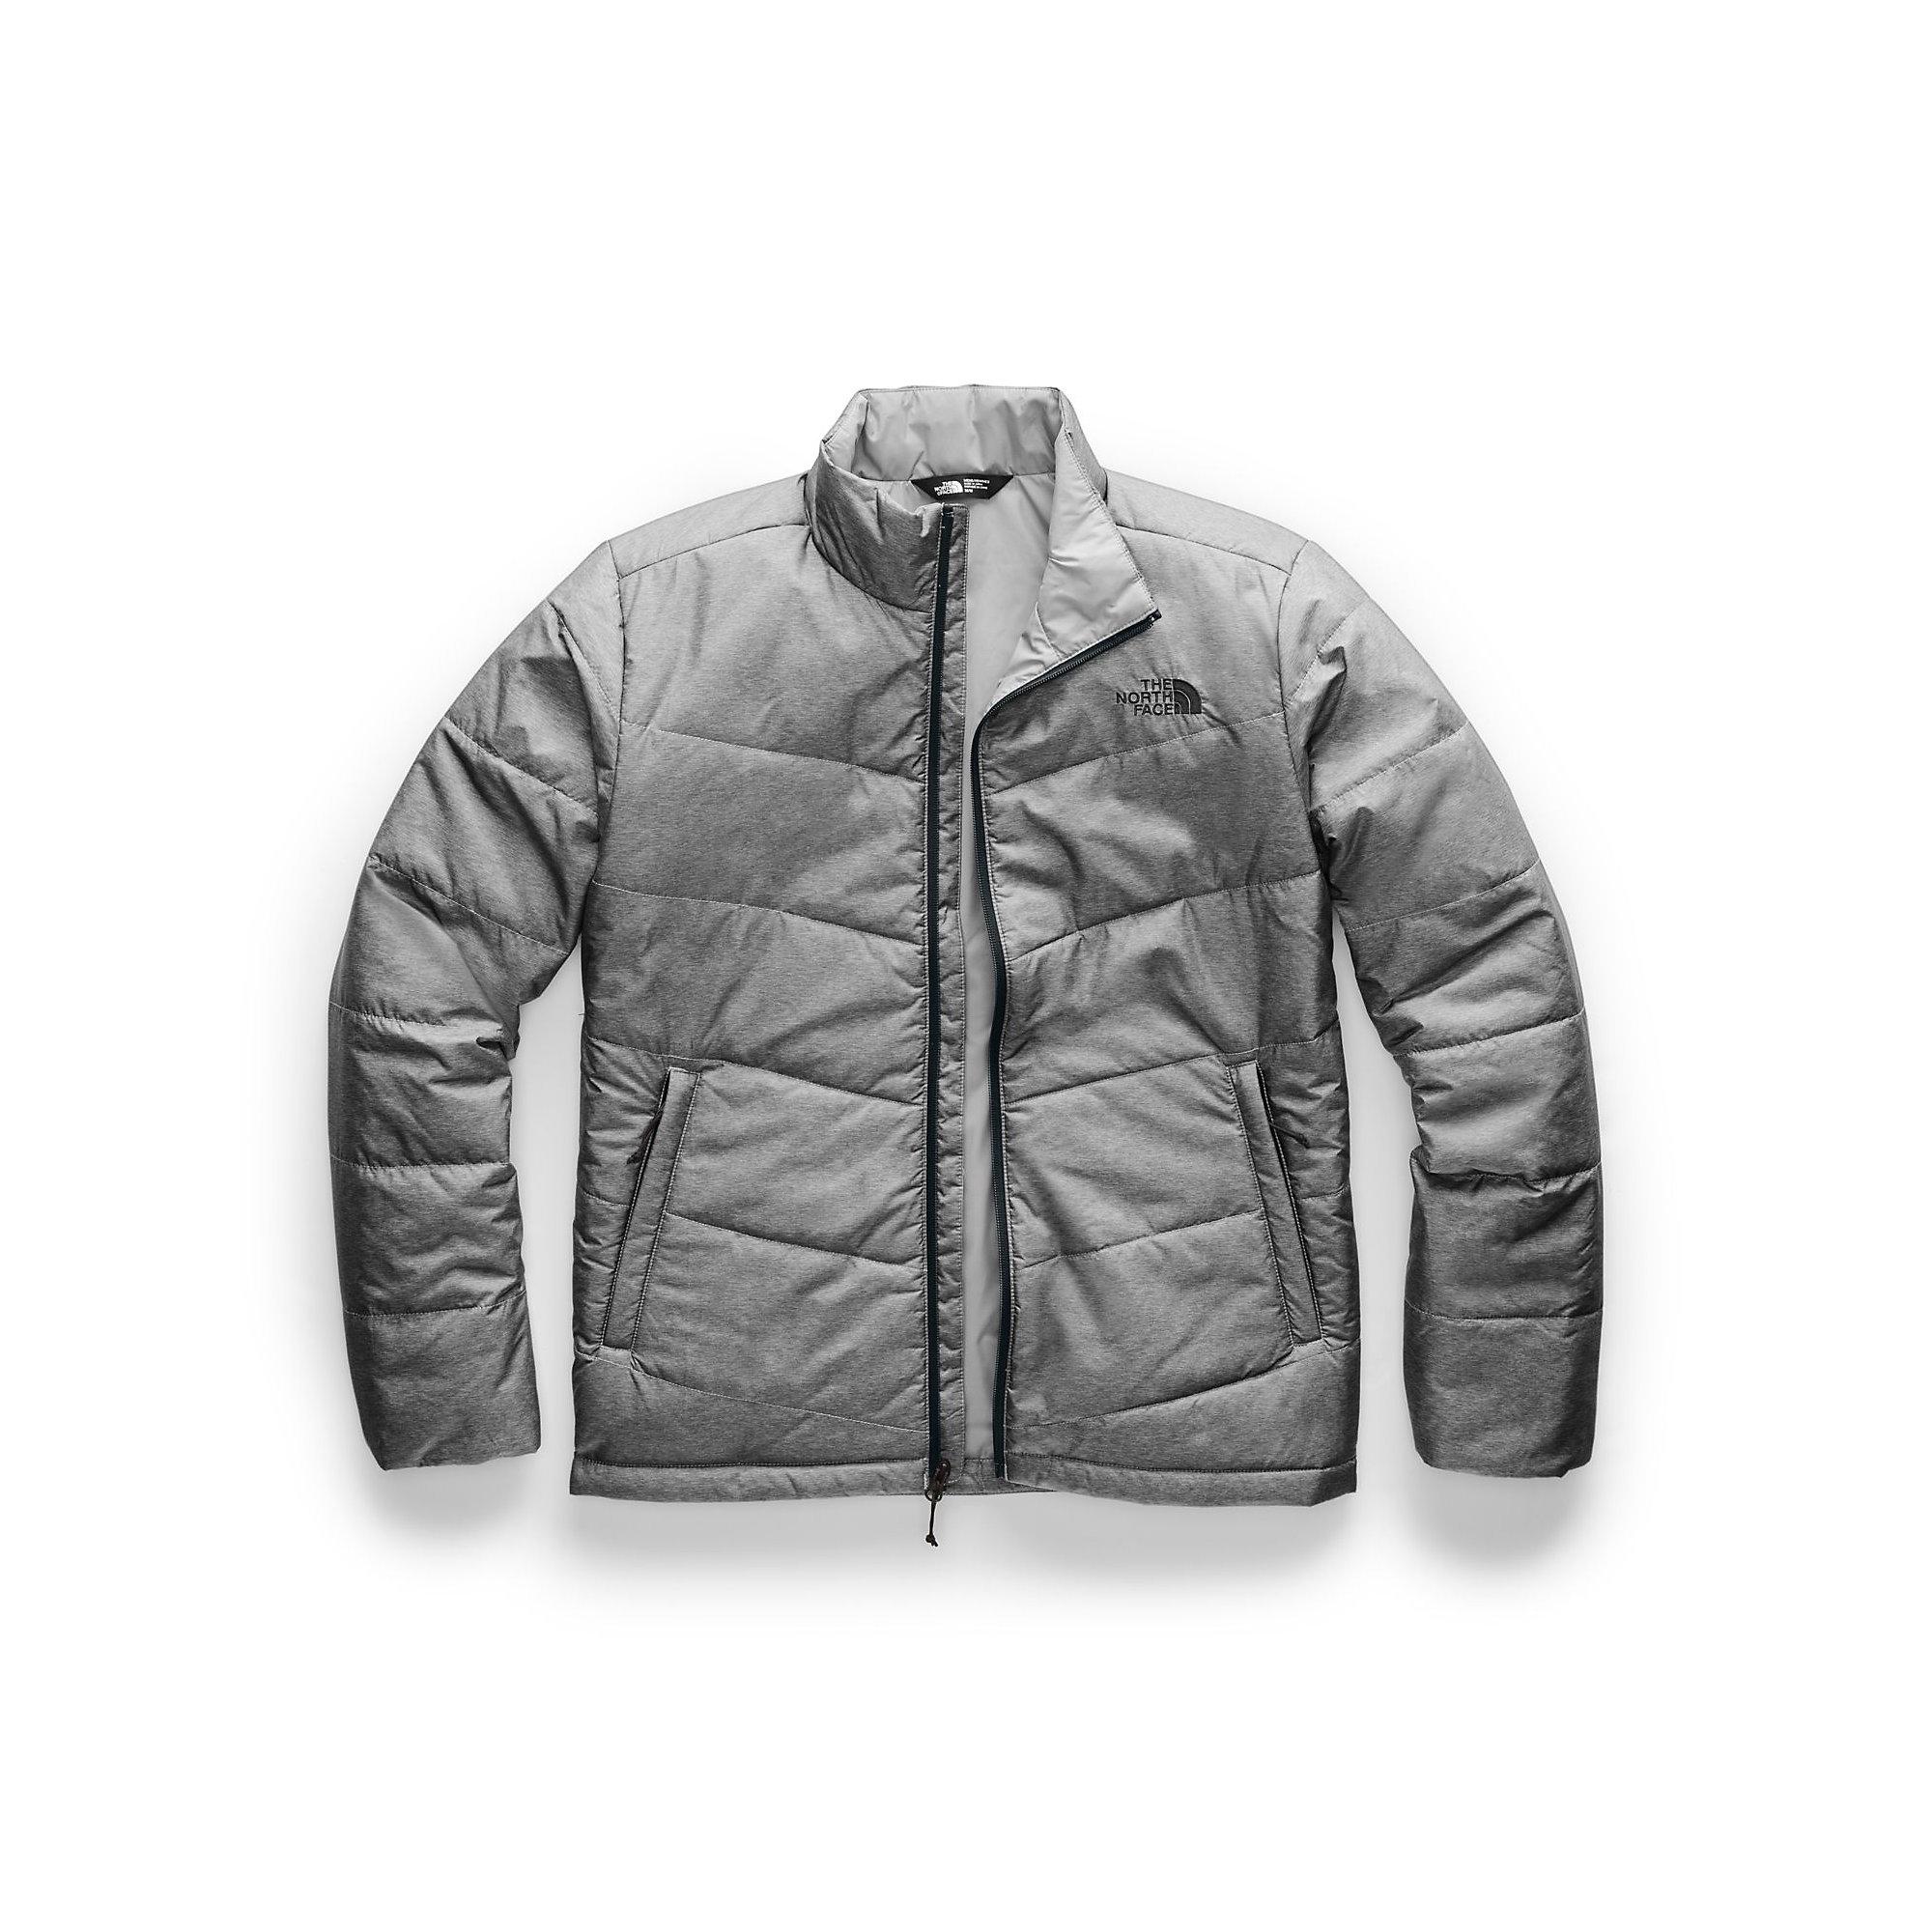 The North Face Synthetic Junction Insulated Jacket in Gray for Men - Lyst